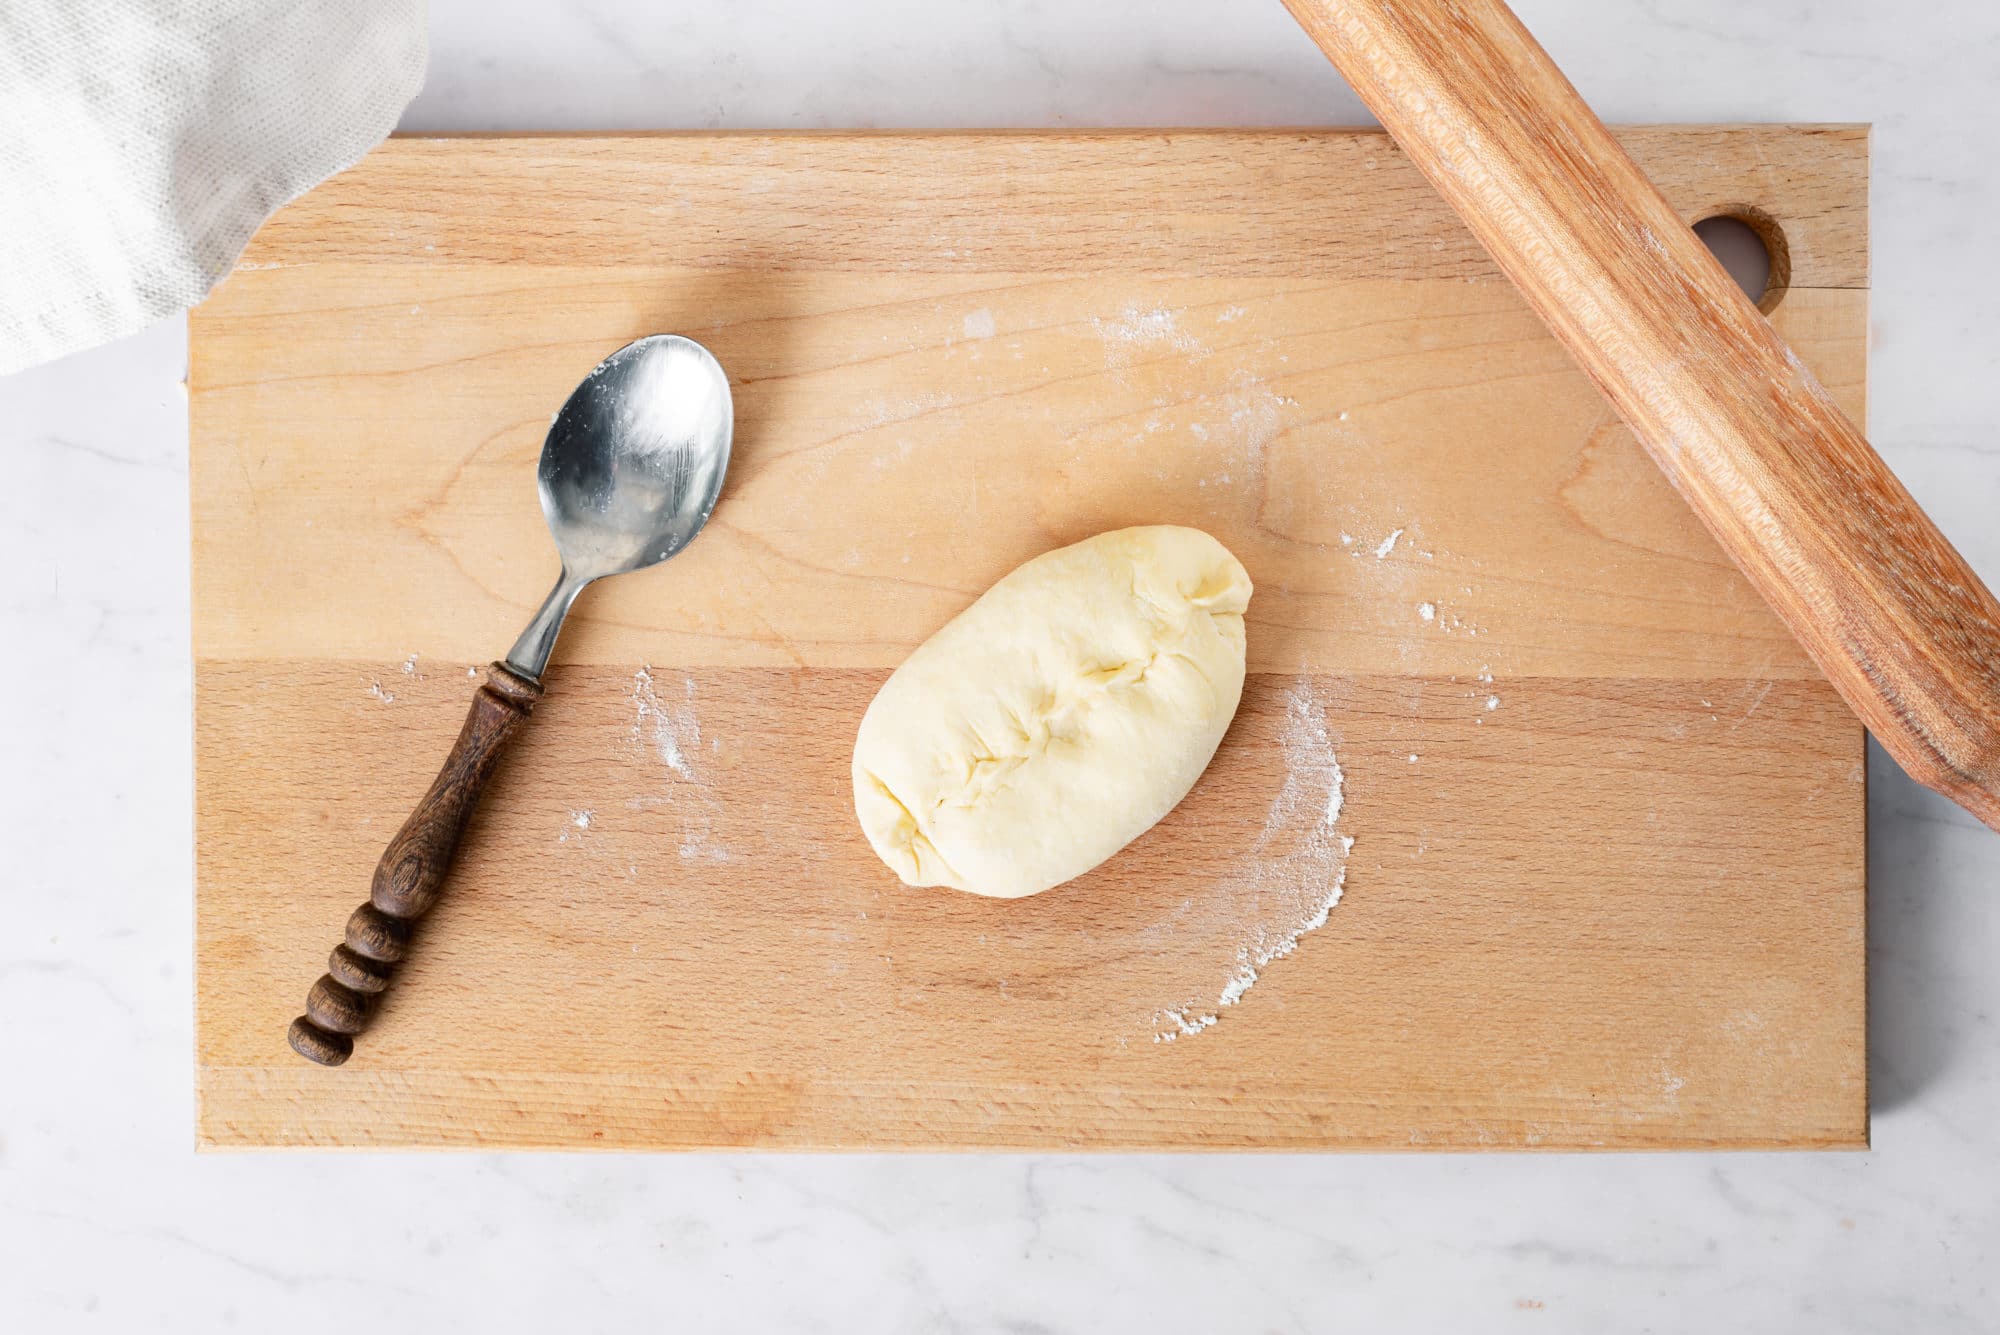 A piroshok on a wooden cutting board with a spoon and a wooden rolling pin on the side.